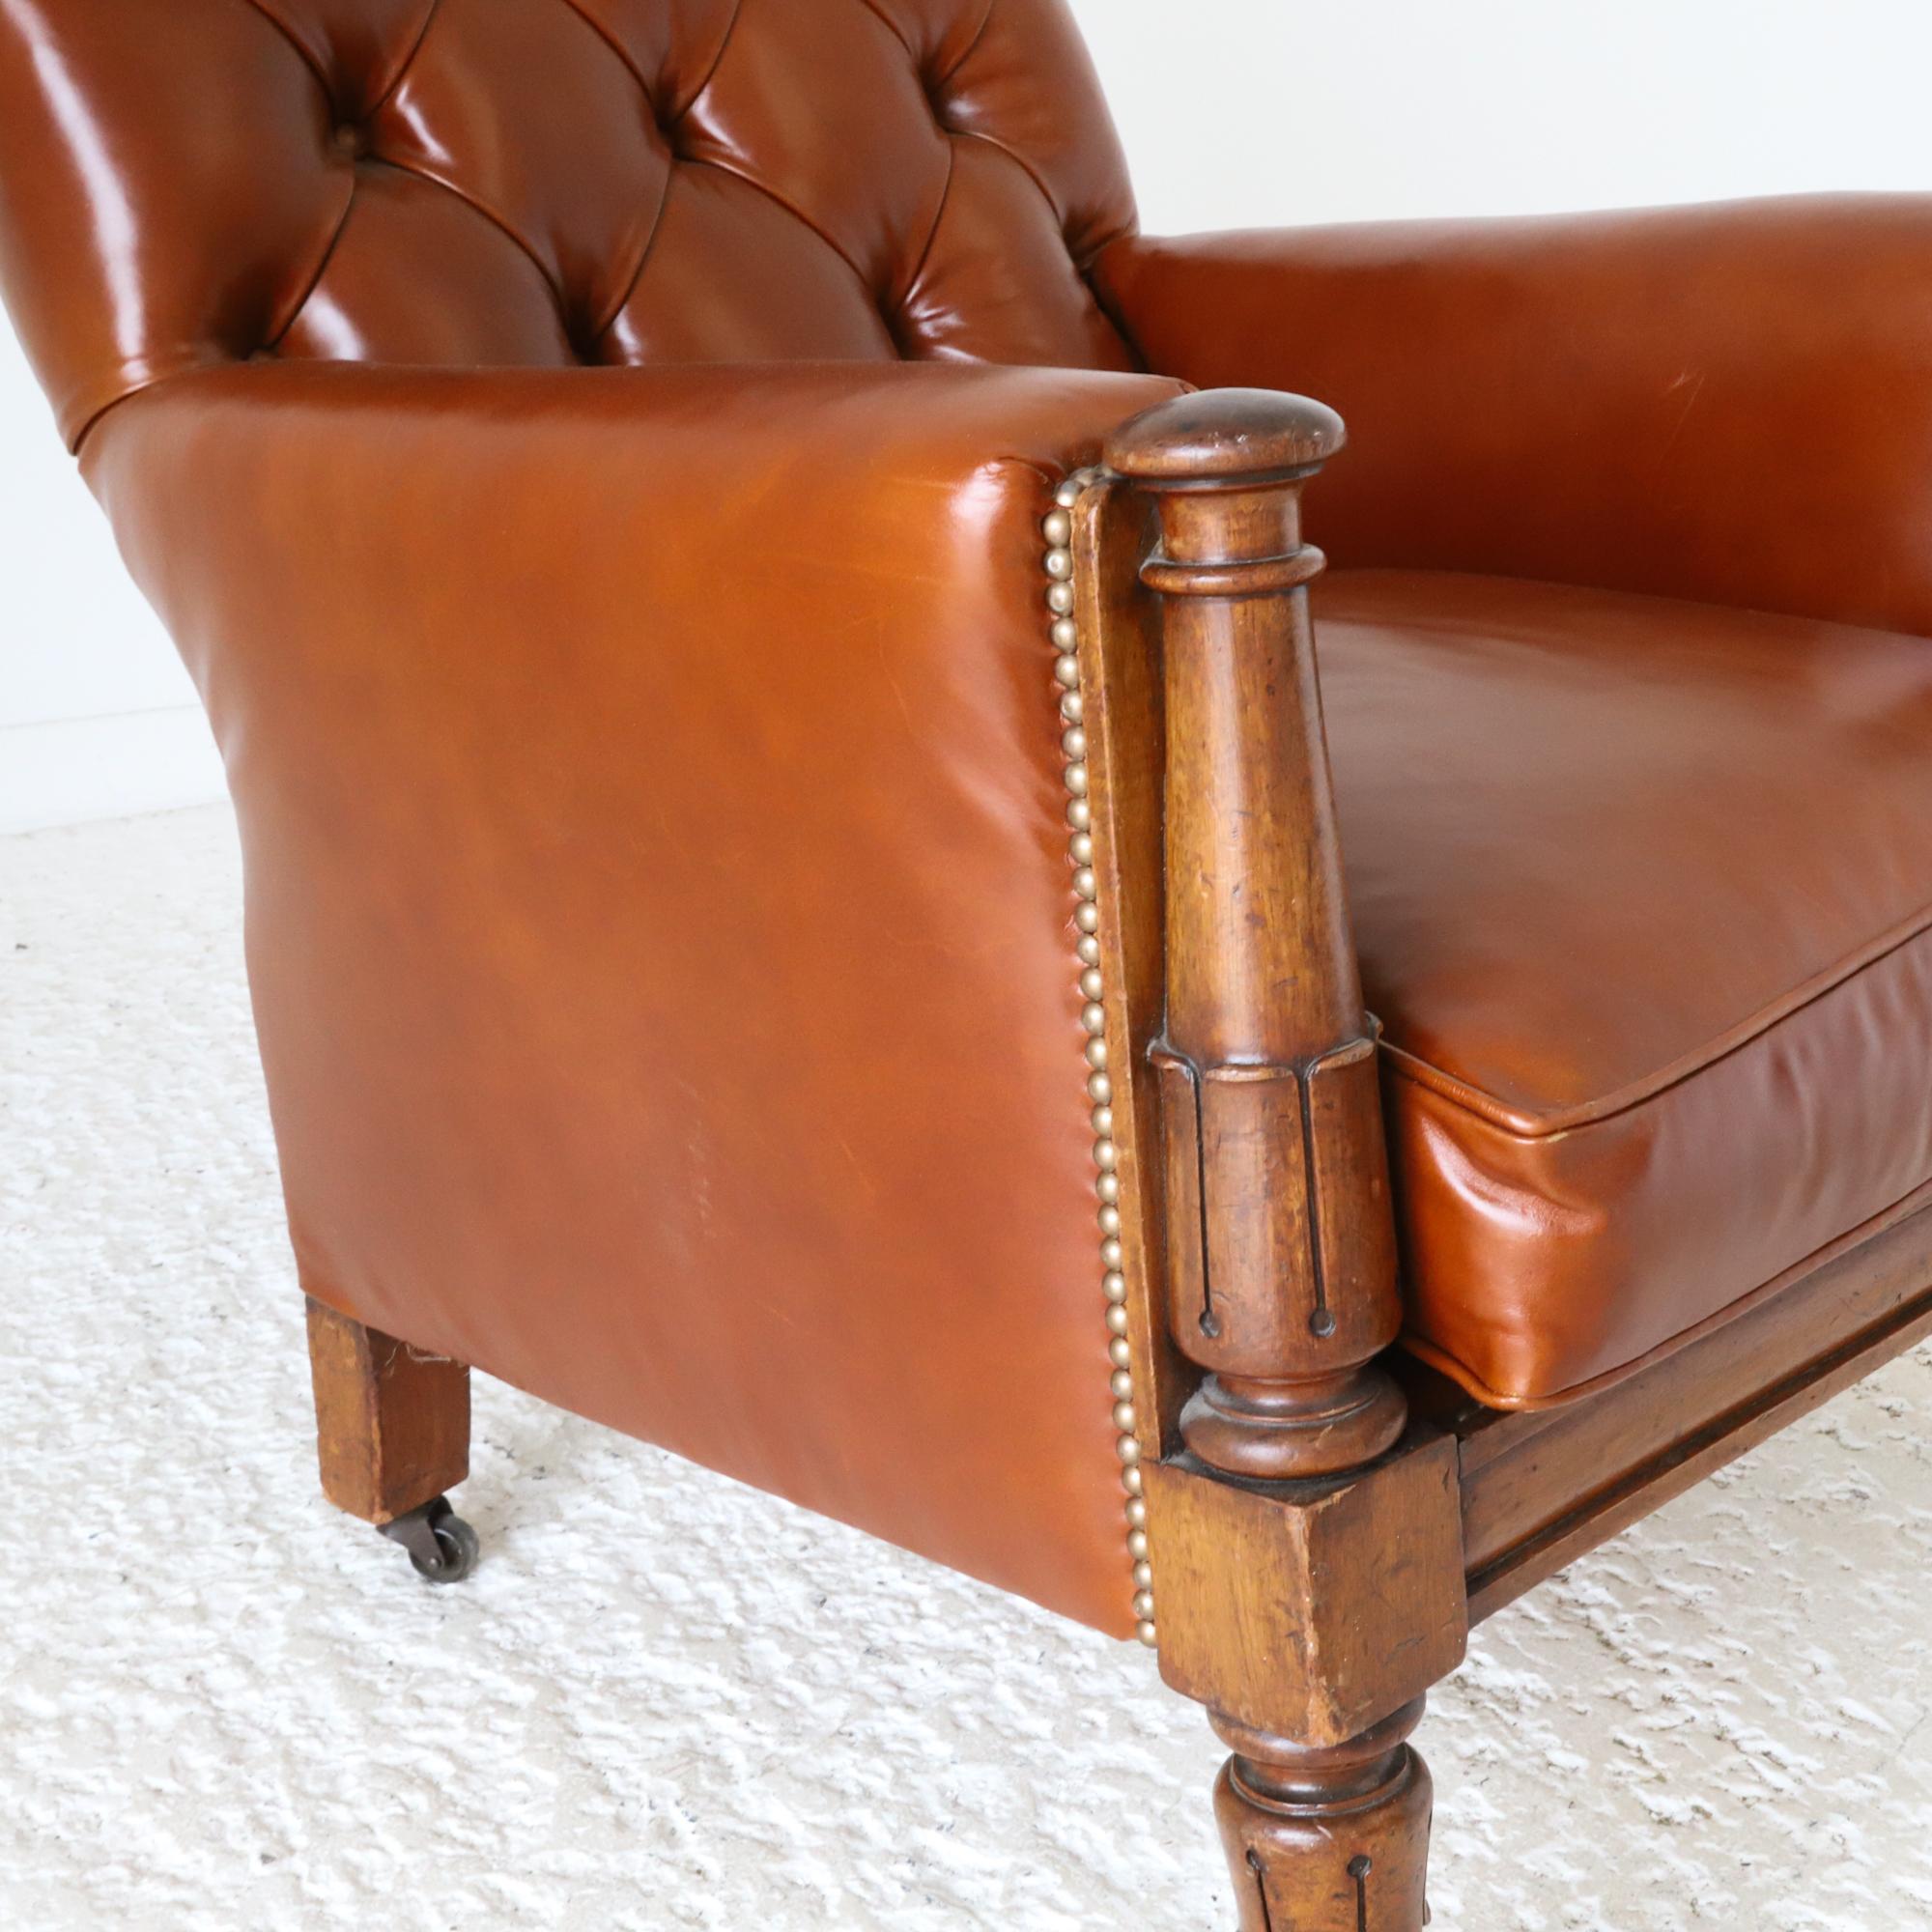 English c. 1830 Mahogany William IV Library Chair reupholstered in tan leather  For Sale 2